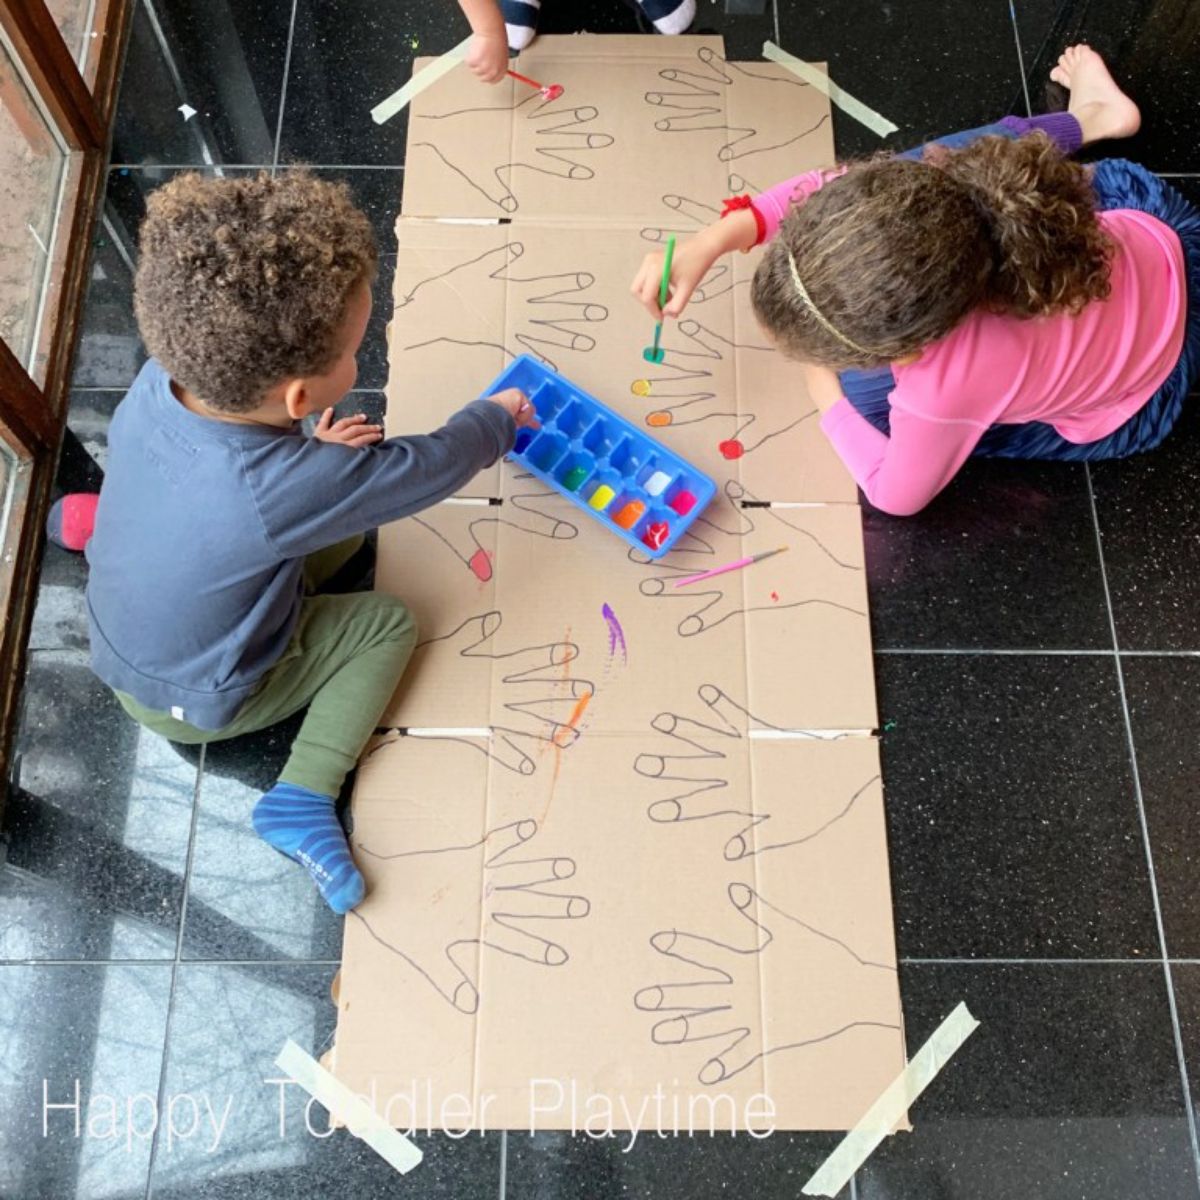 two children kneel on a black tiled floor coloring in large hand shapes drawn on a sheet of cardboard